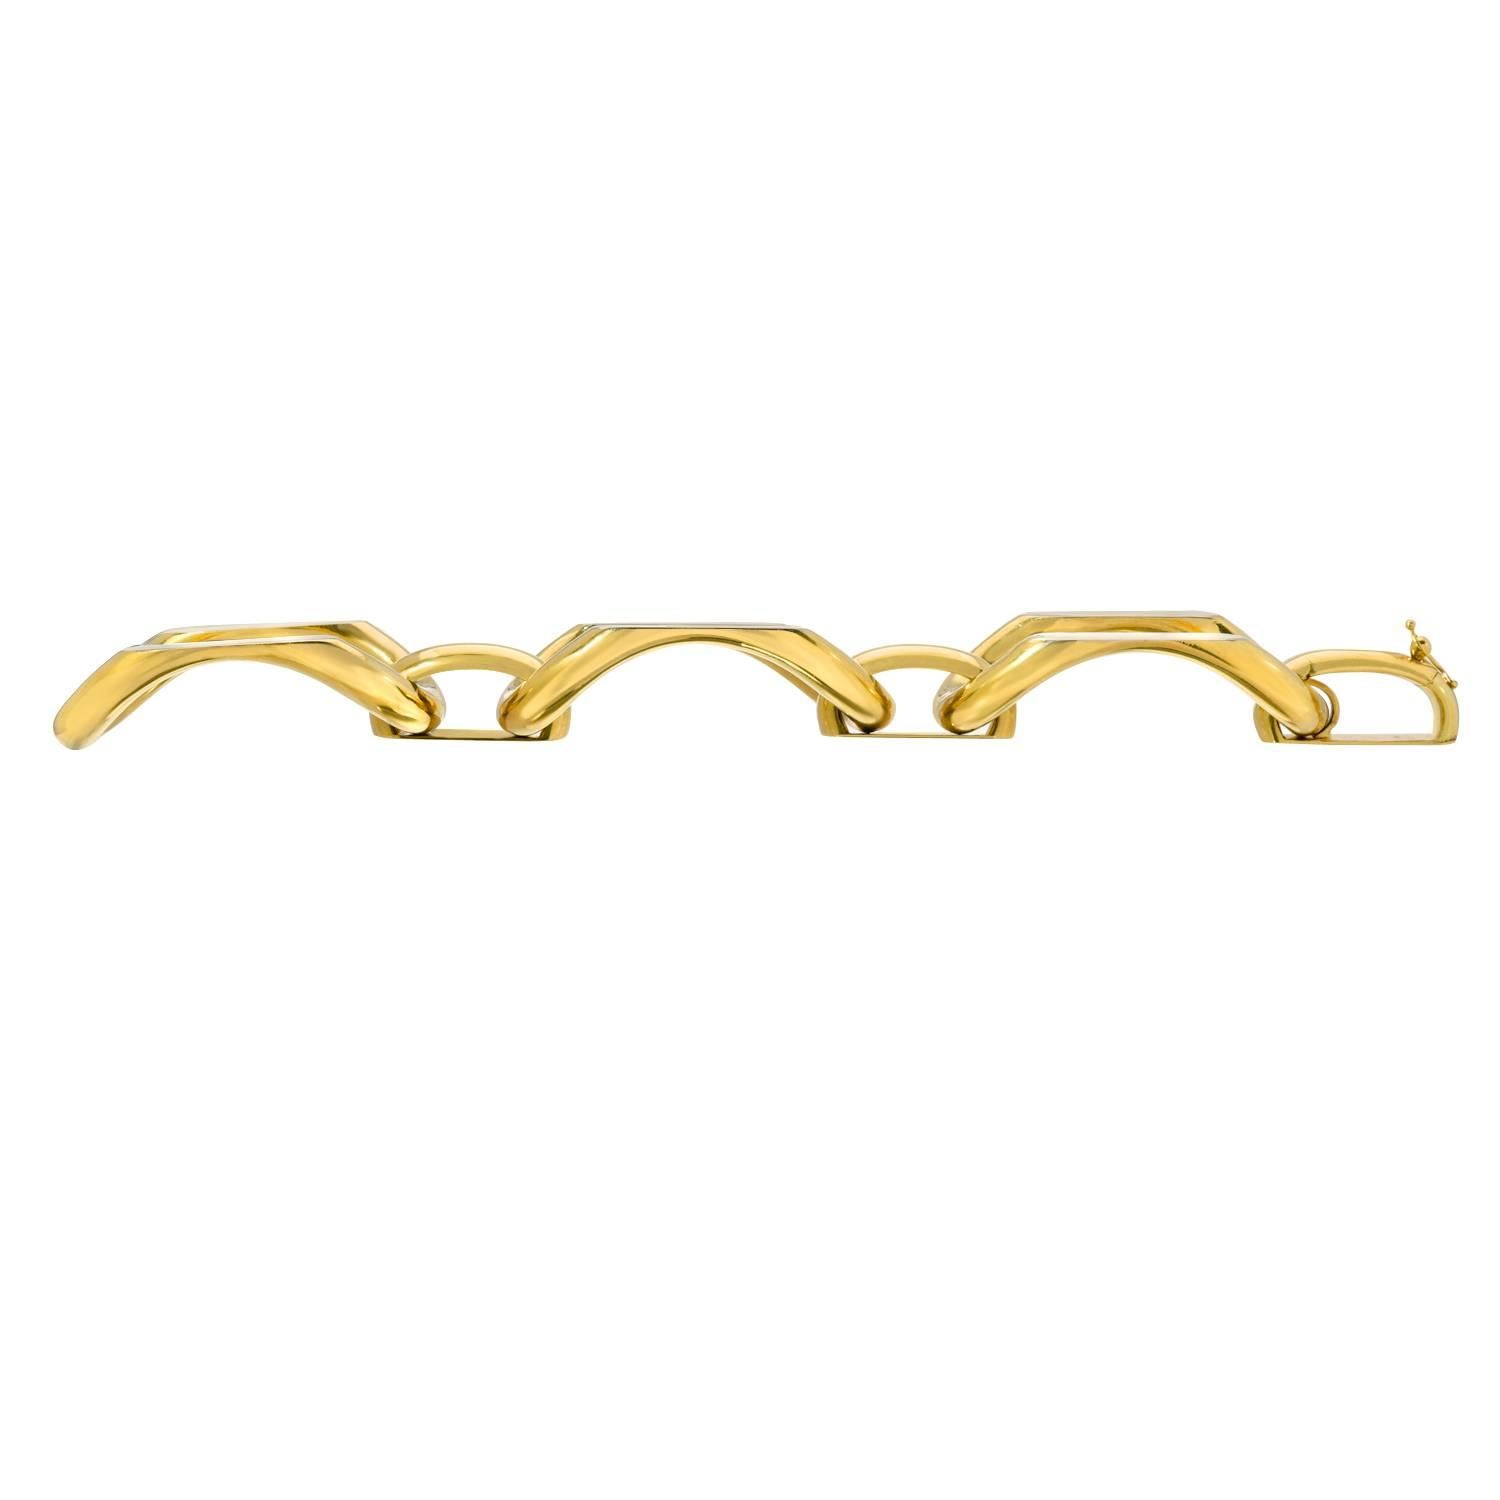 Designed as a series of geometric arched gold links, the top of each with white gold detail, the smaller arched gold spacers  

